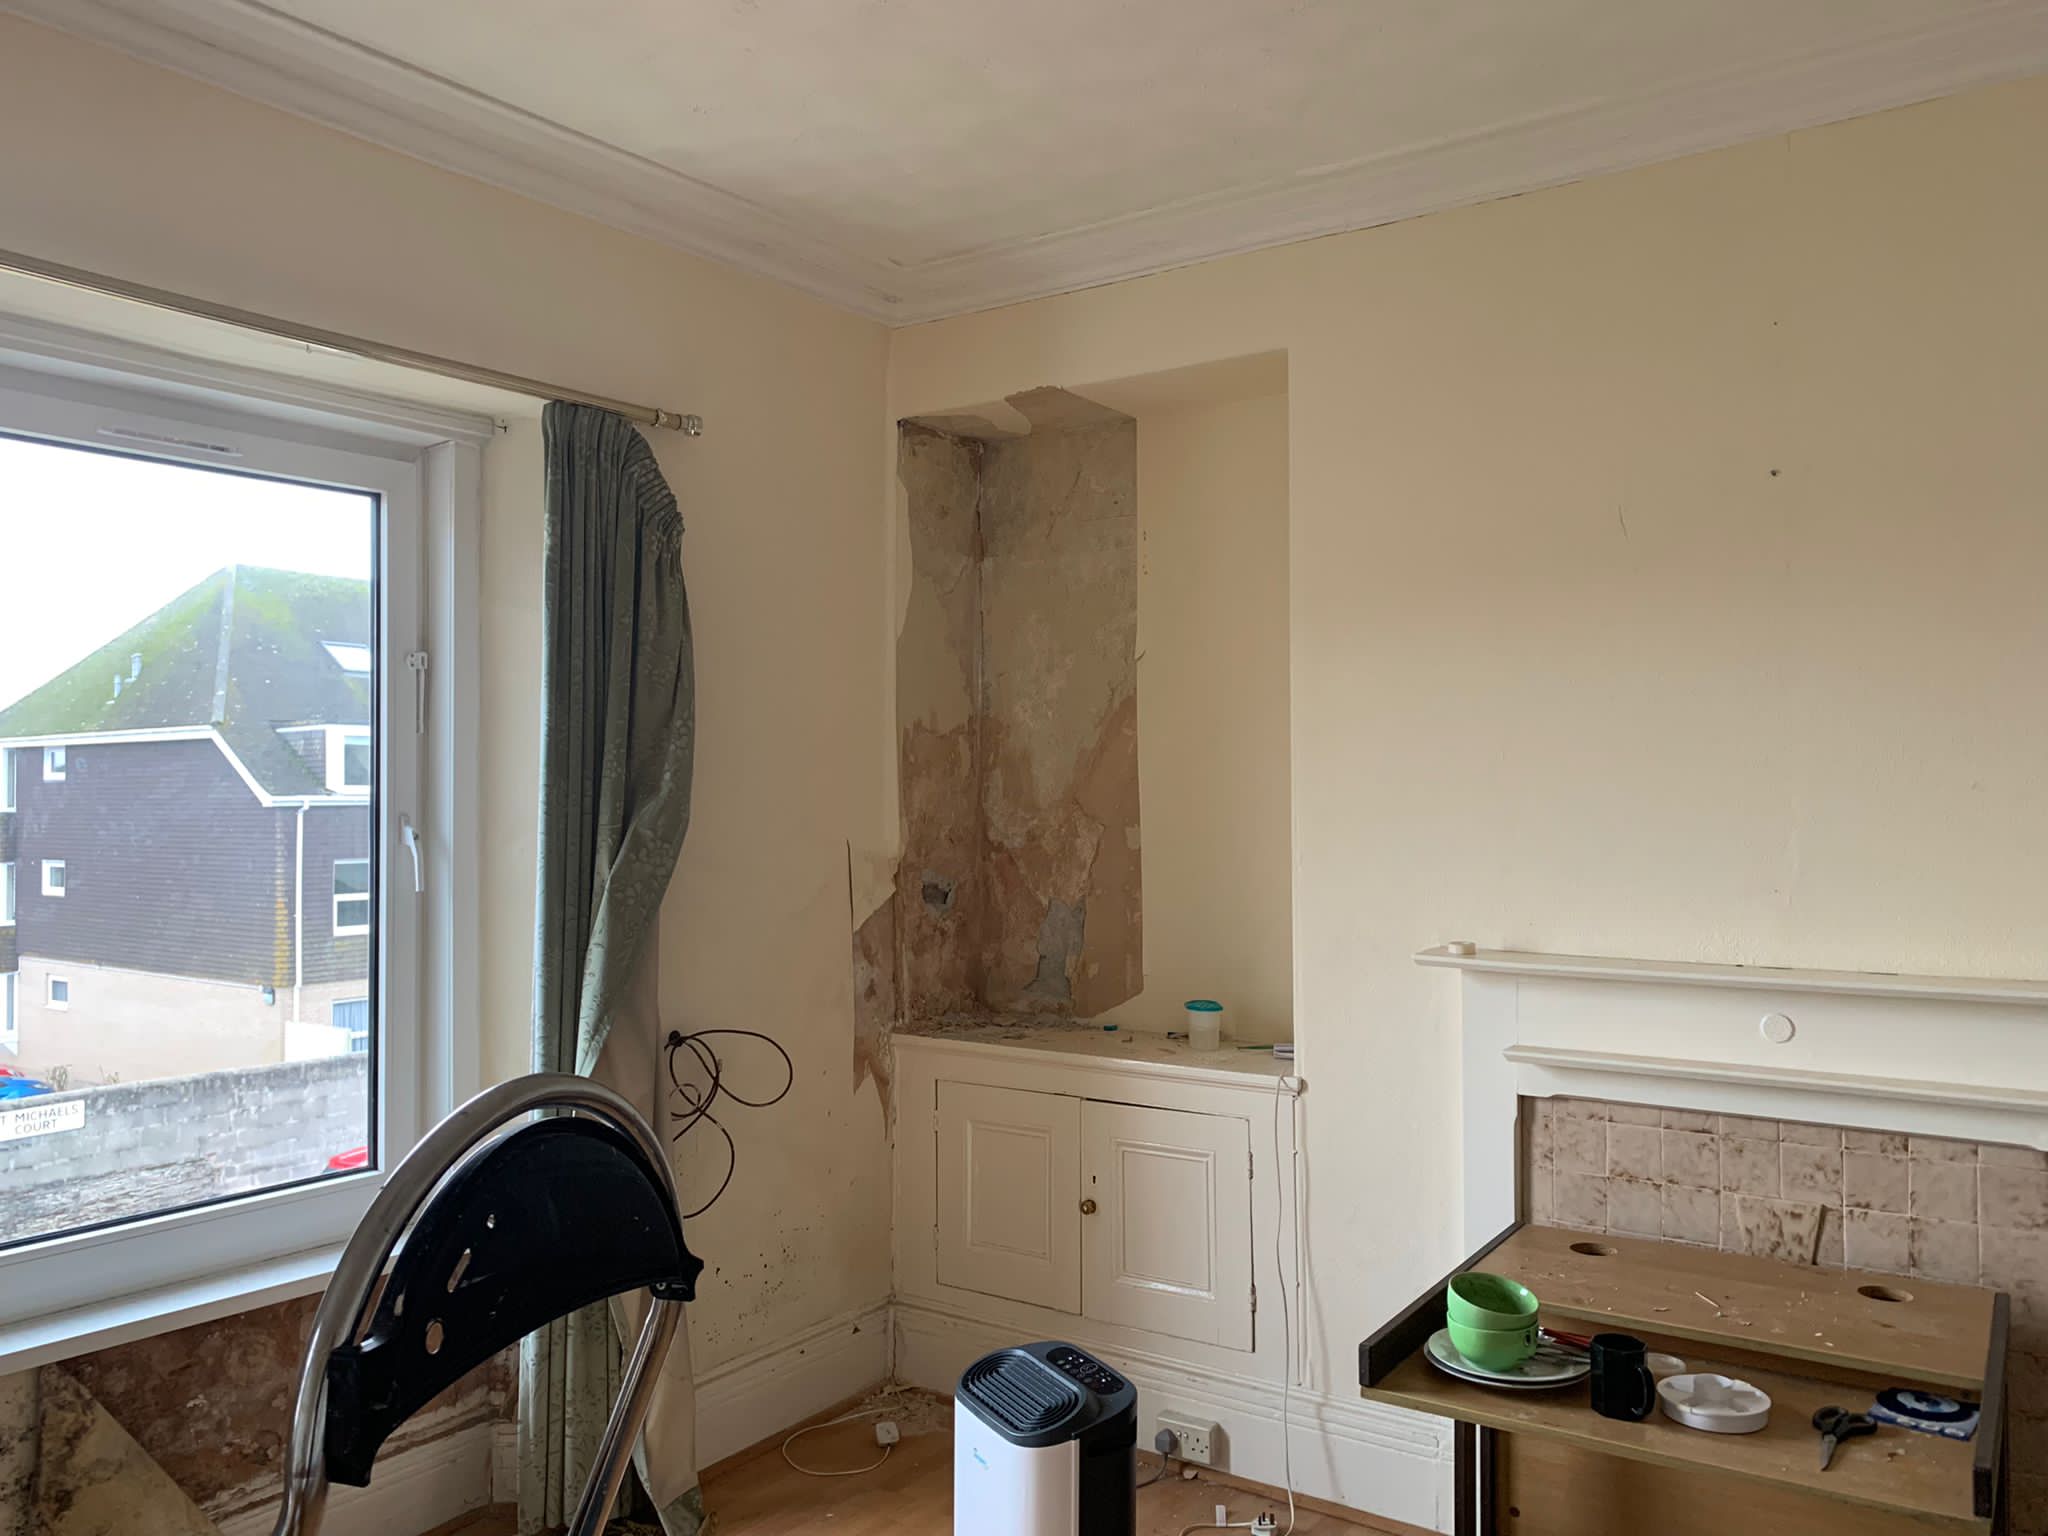 DO we always have to replaster fully after efflorescence?